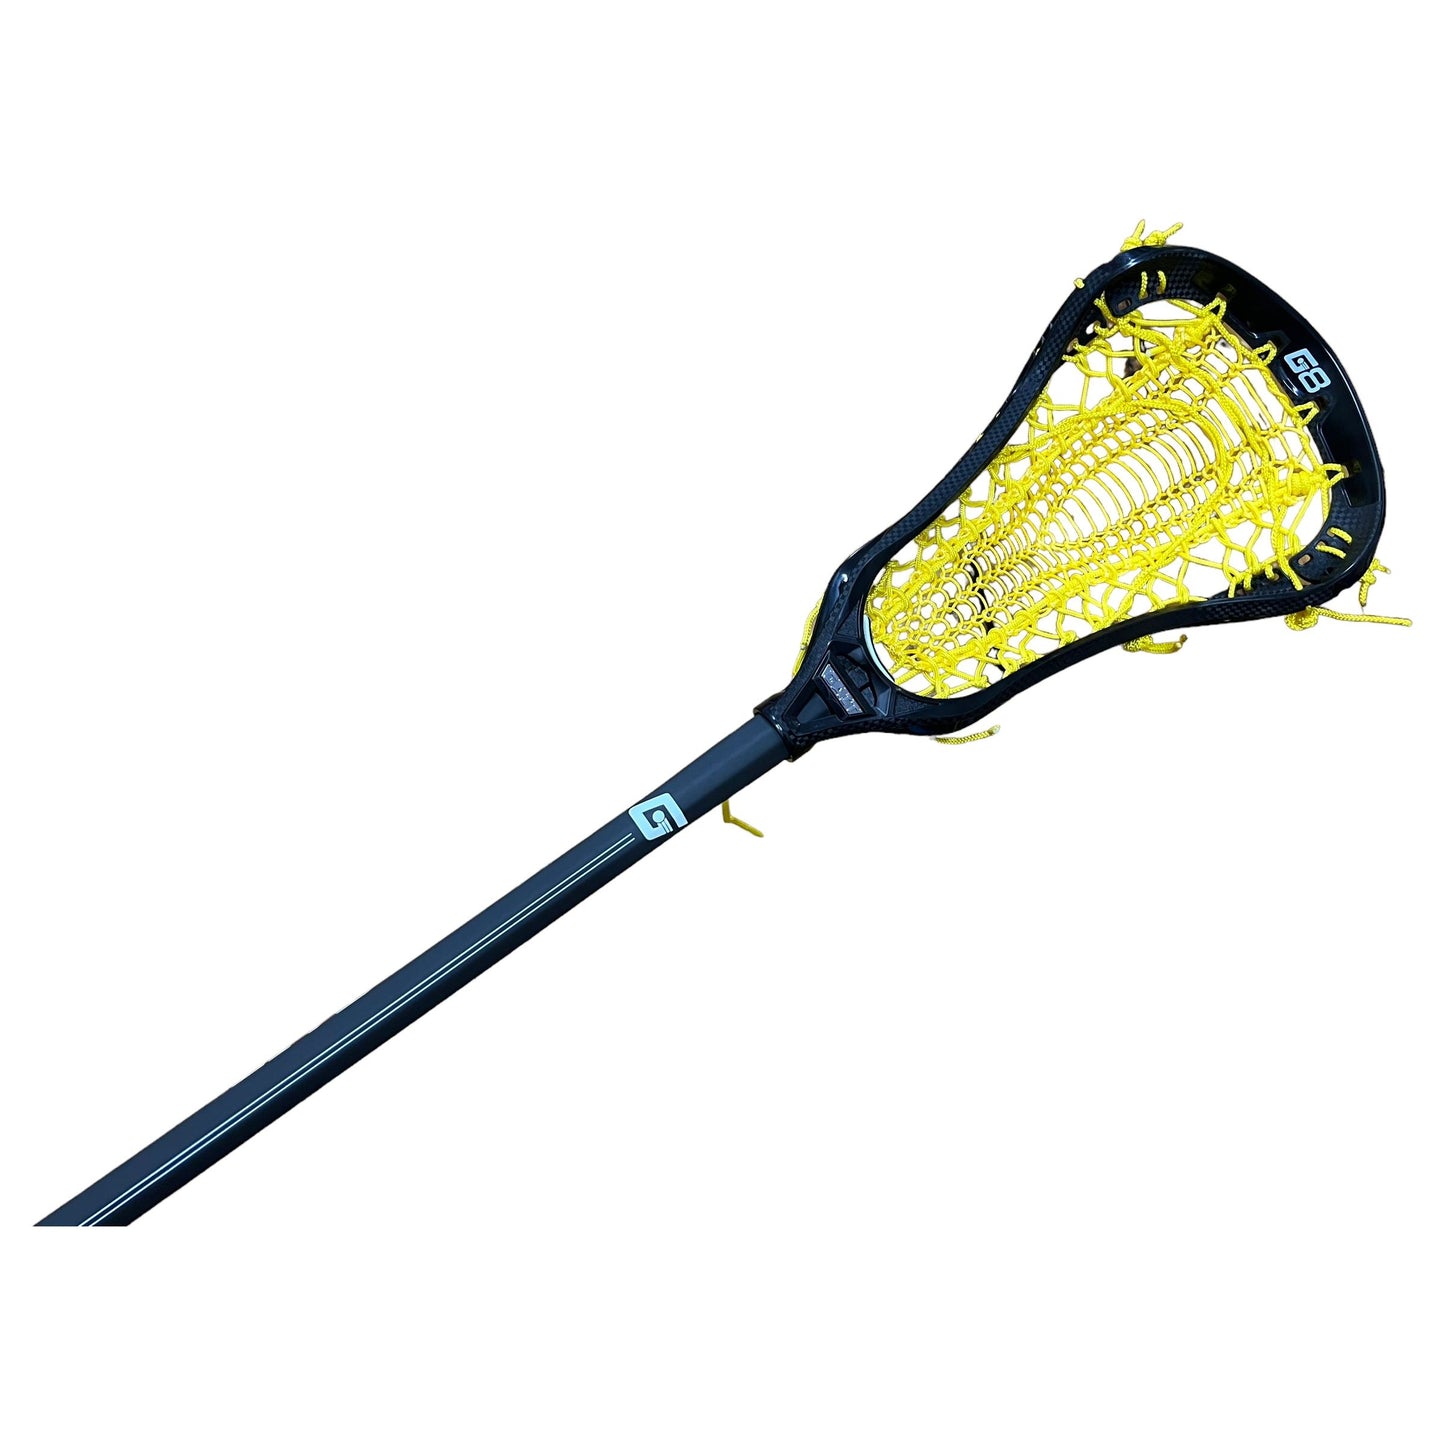 Gait Whip 2 Complete Women's Lacrosse Stick with Armour Mesh Valkyrie Pocket Black/Yellow